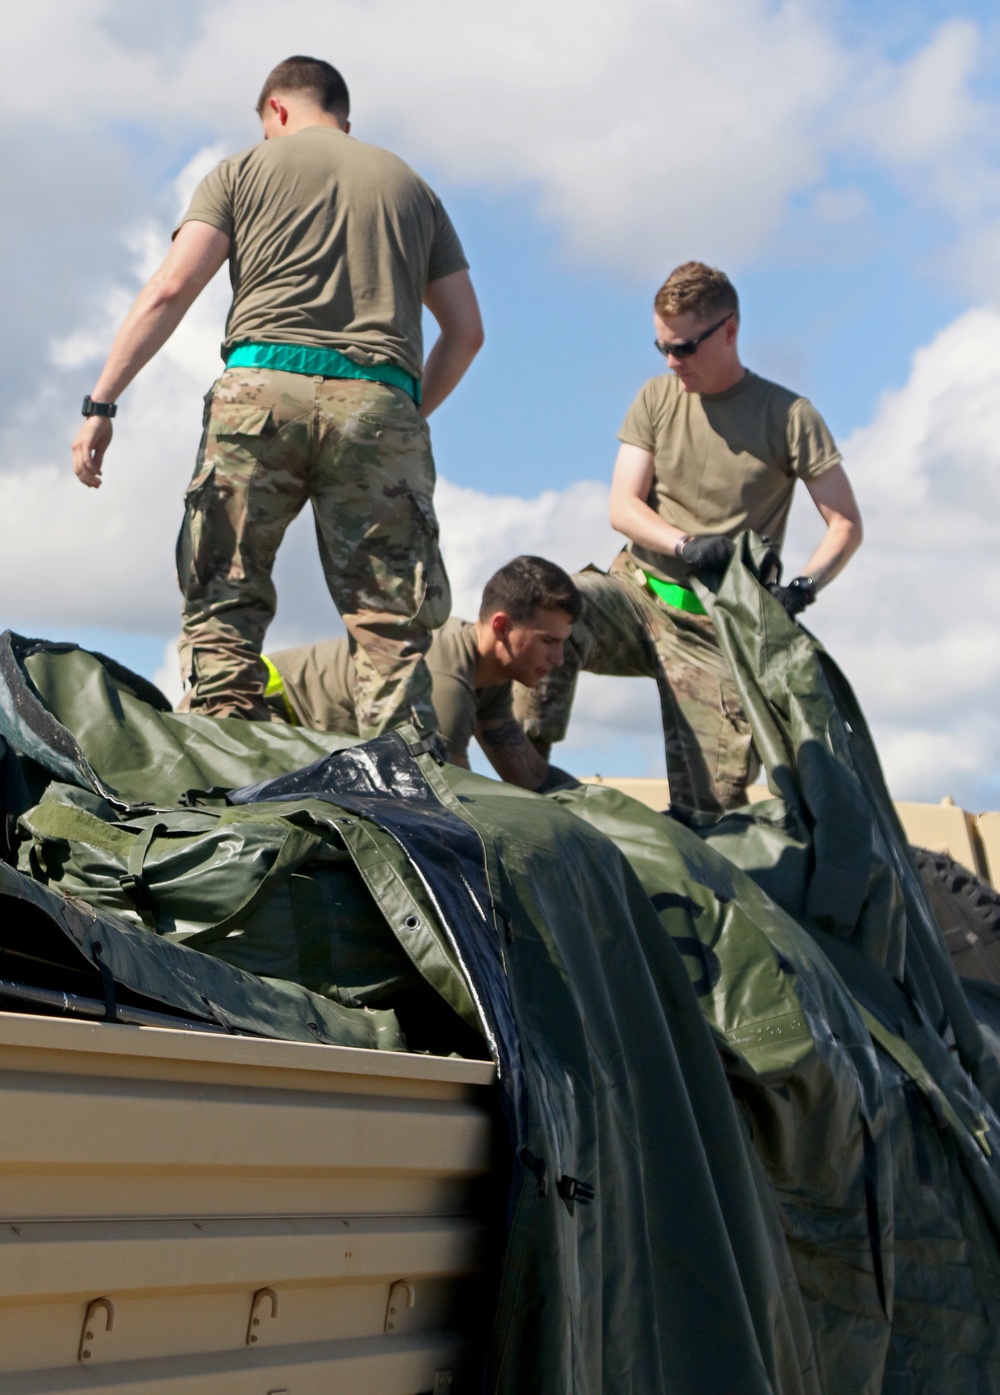 548th Combat Sustainment Support Battalion Readies Itself for Hurricane Relief